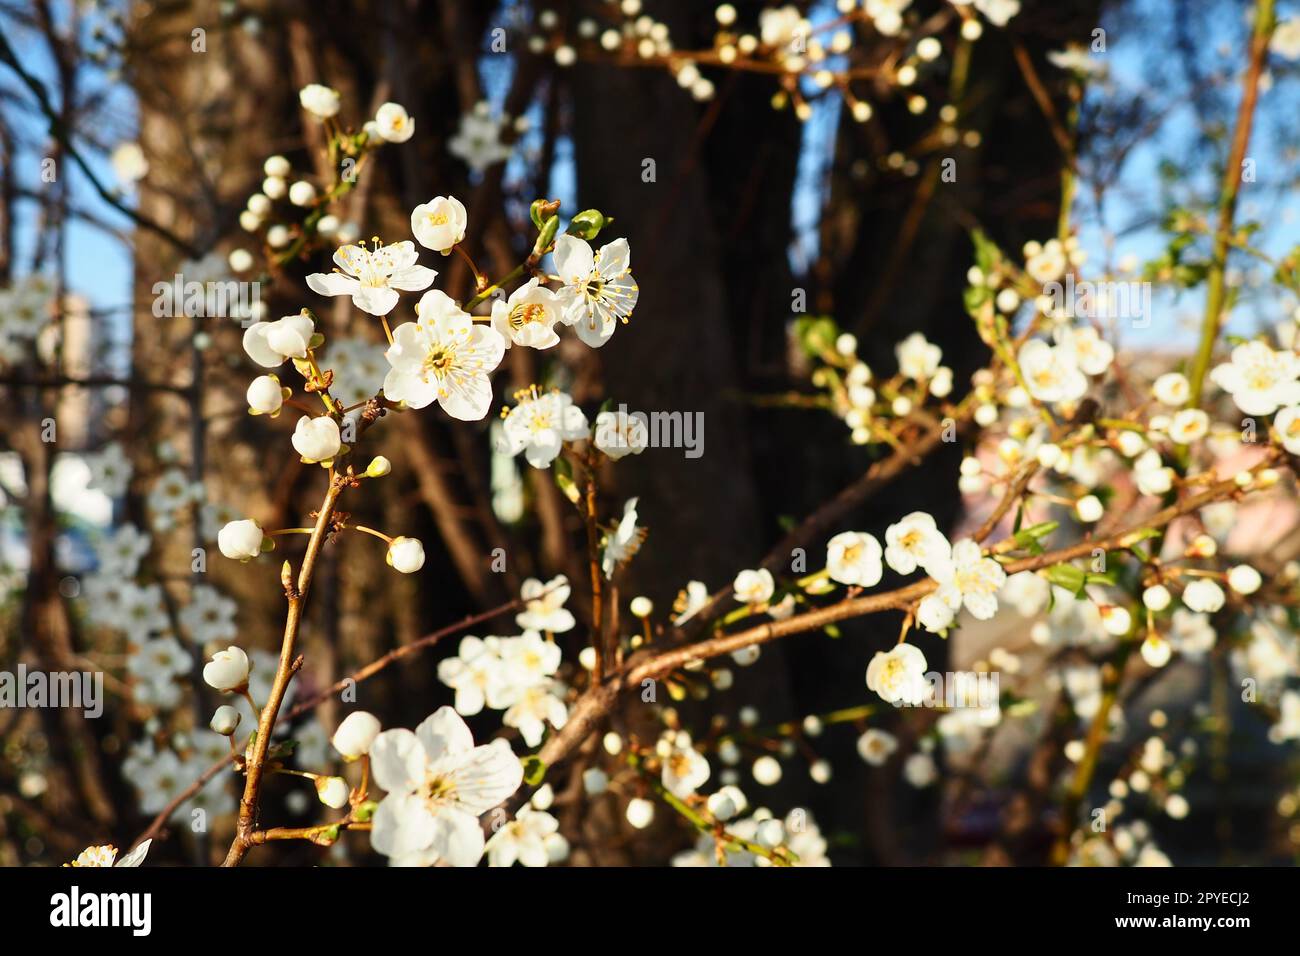 Blossoming of cherries, sweet cherries and bird cherry. Beautiful fragrant white flowers on the branches during the golden hour. Spring white flowers are collected in long thick drooping brushes Stock Photo